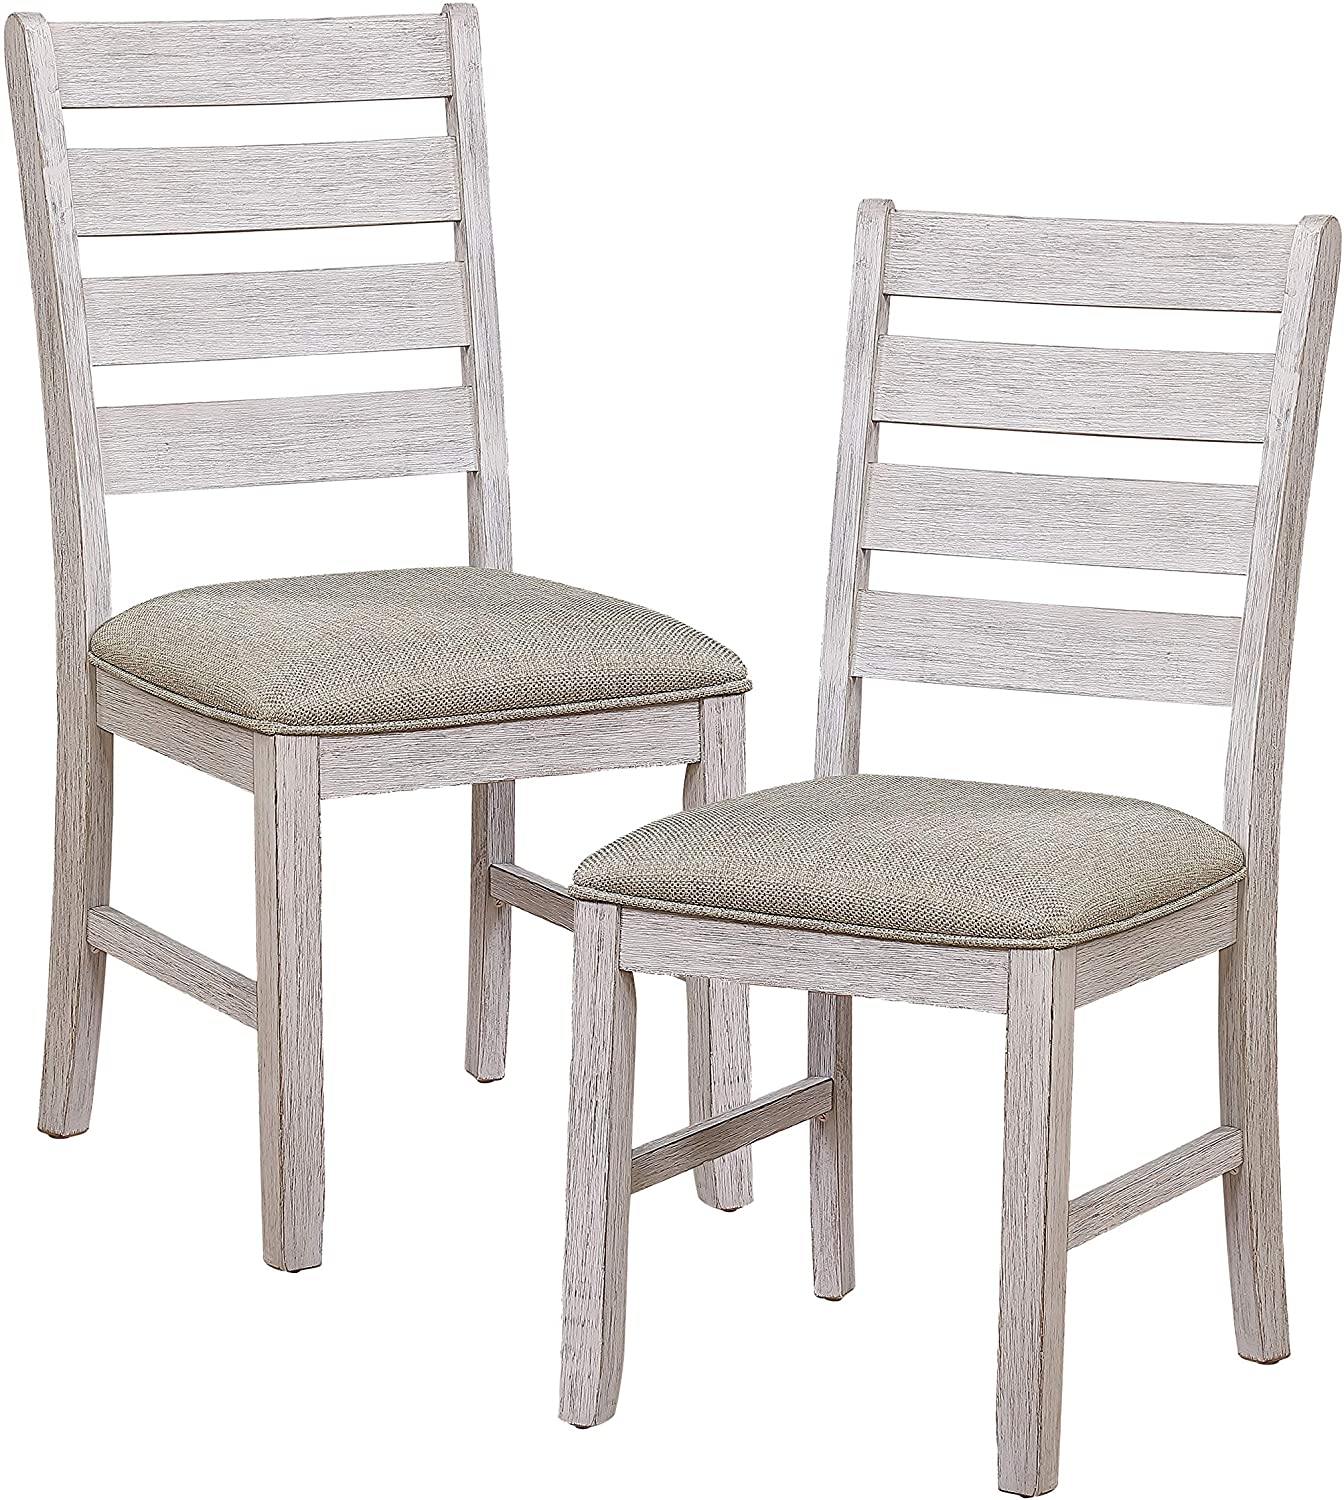 B087LPLPWY Lexicon Ameillia Dining Chair (Set of 2), White